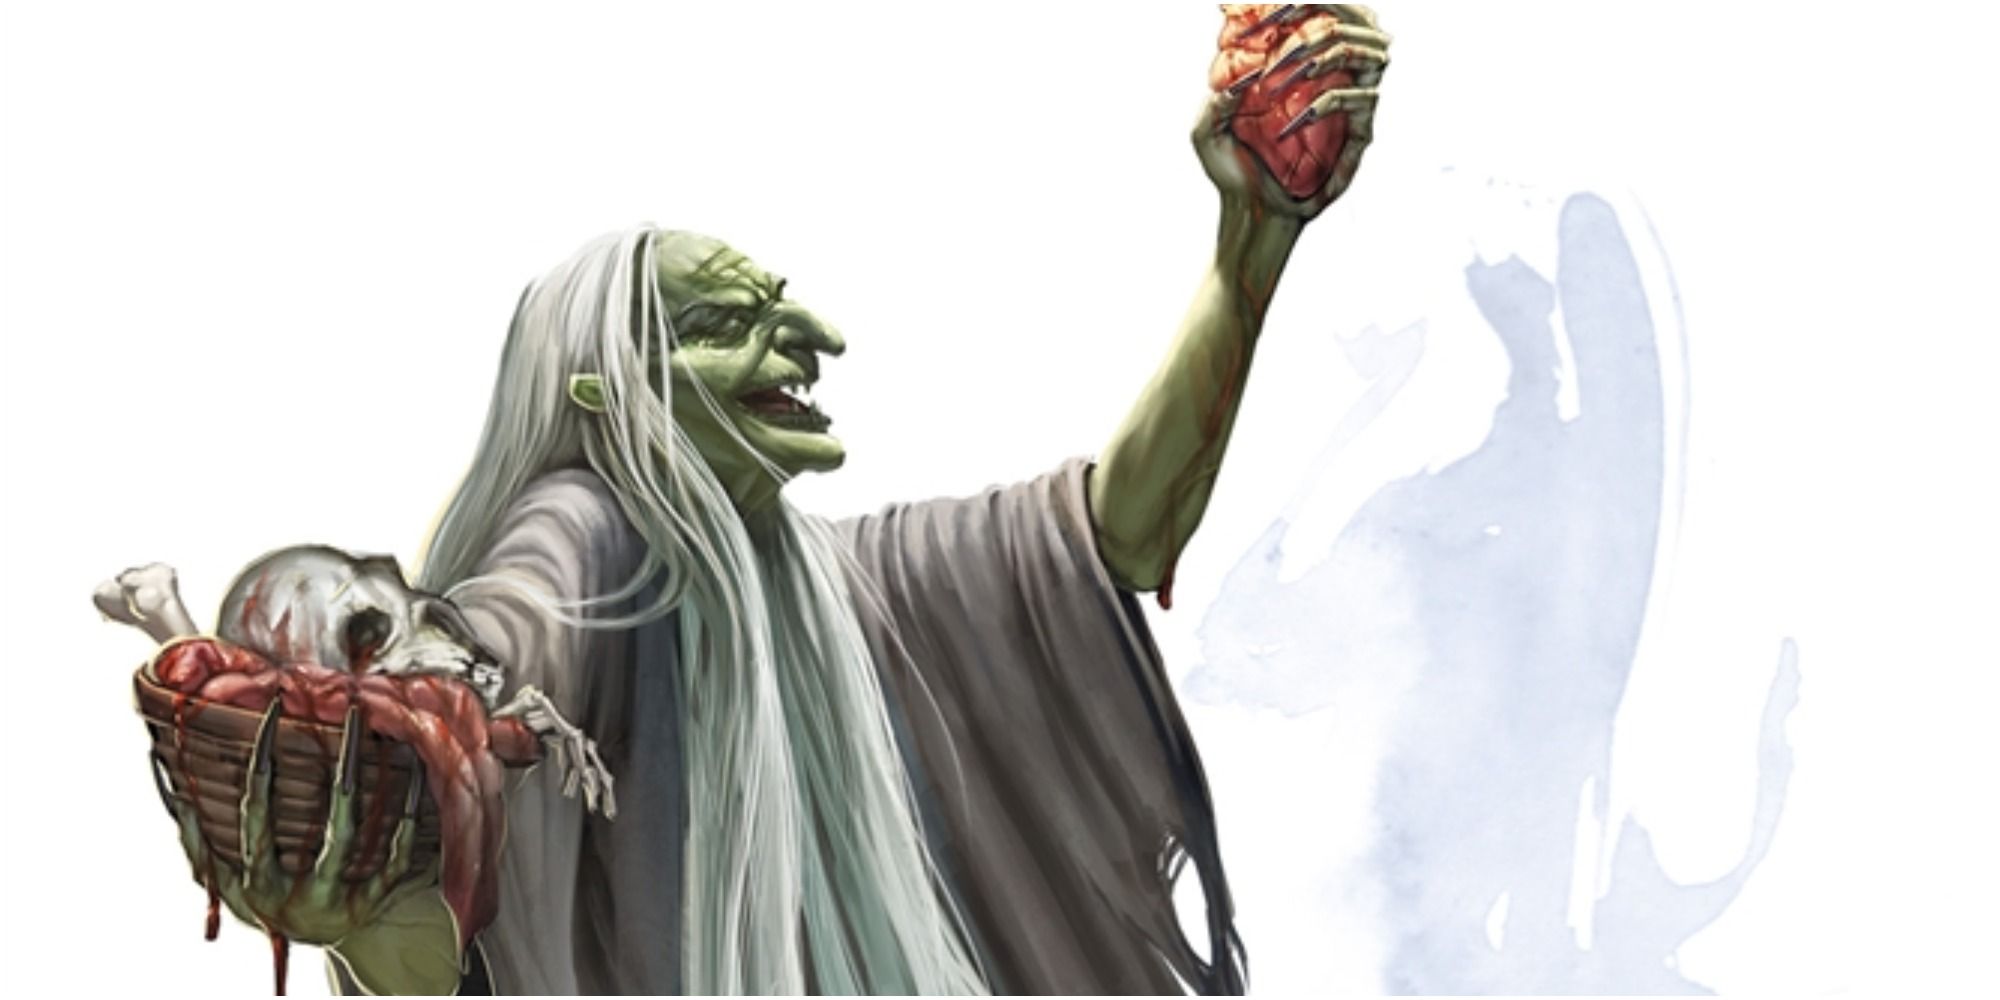 The green hag art for dungeons and dragons